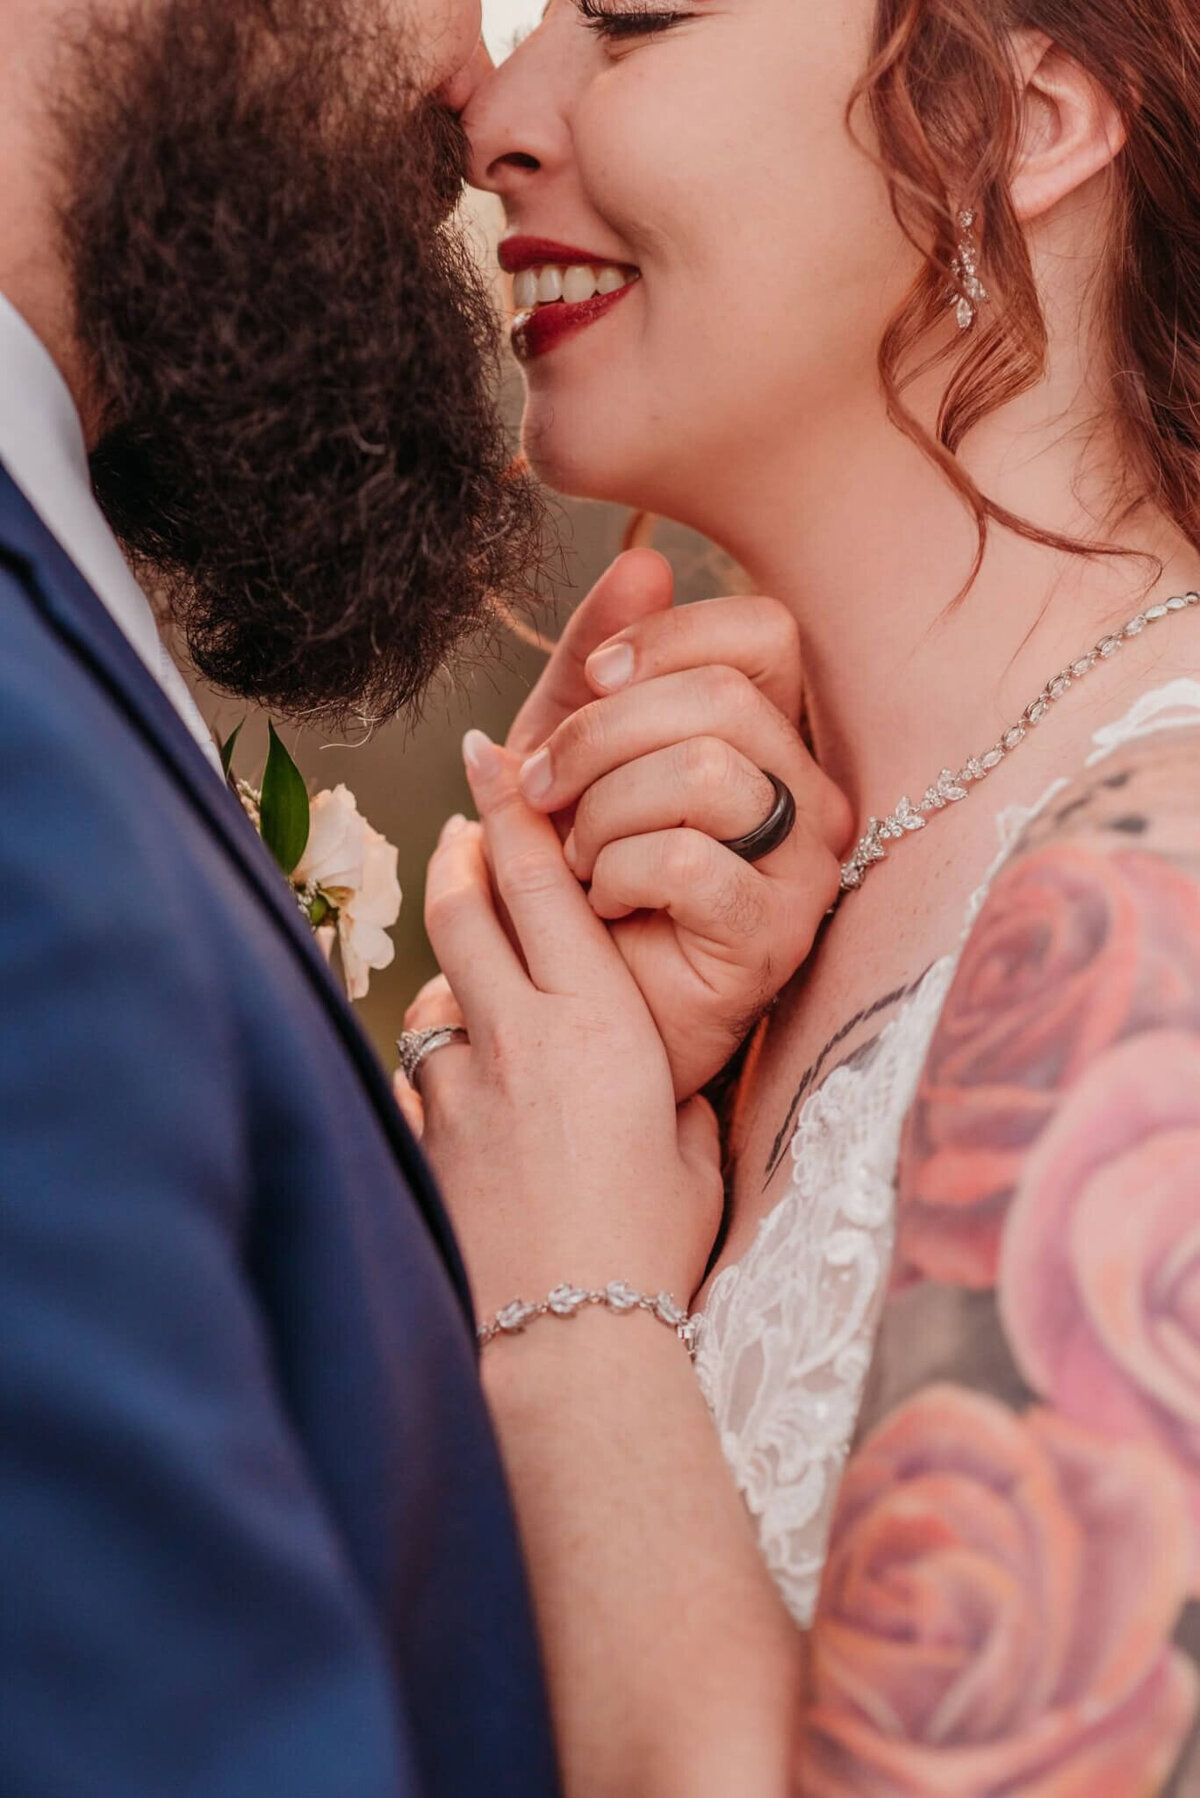 Photo of a bride and groom about to kiss while holding hands and showing off their wedding rings